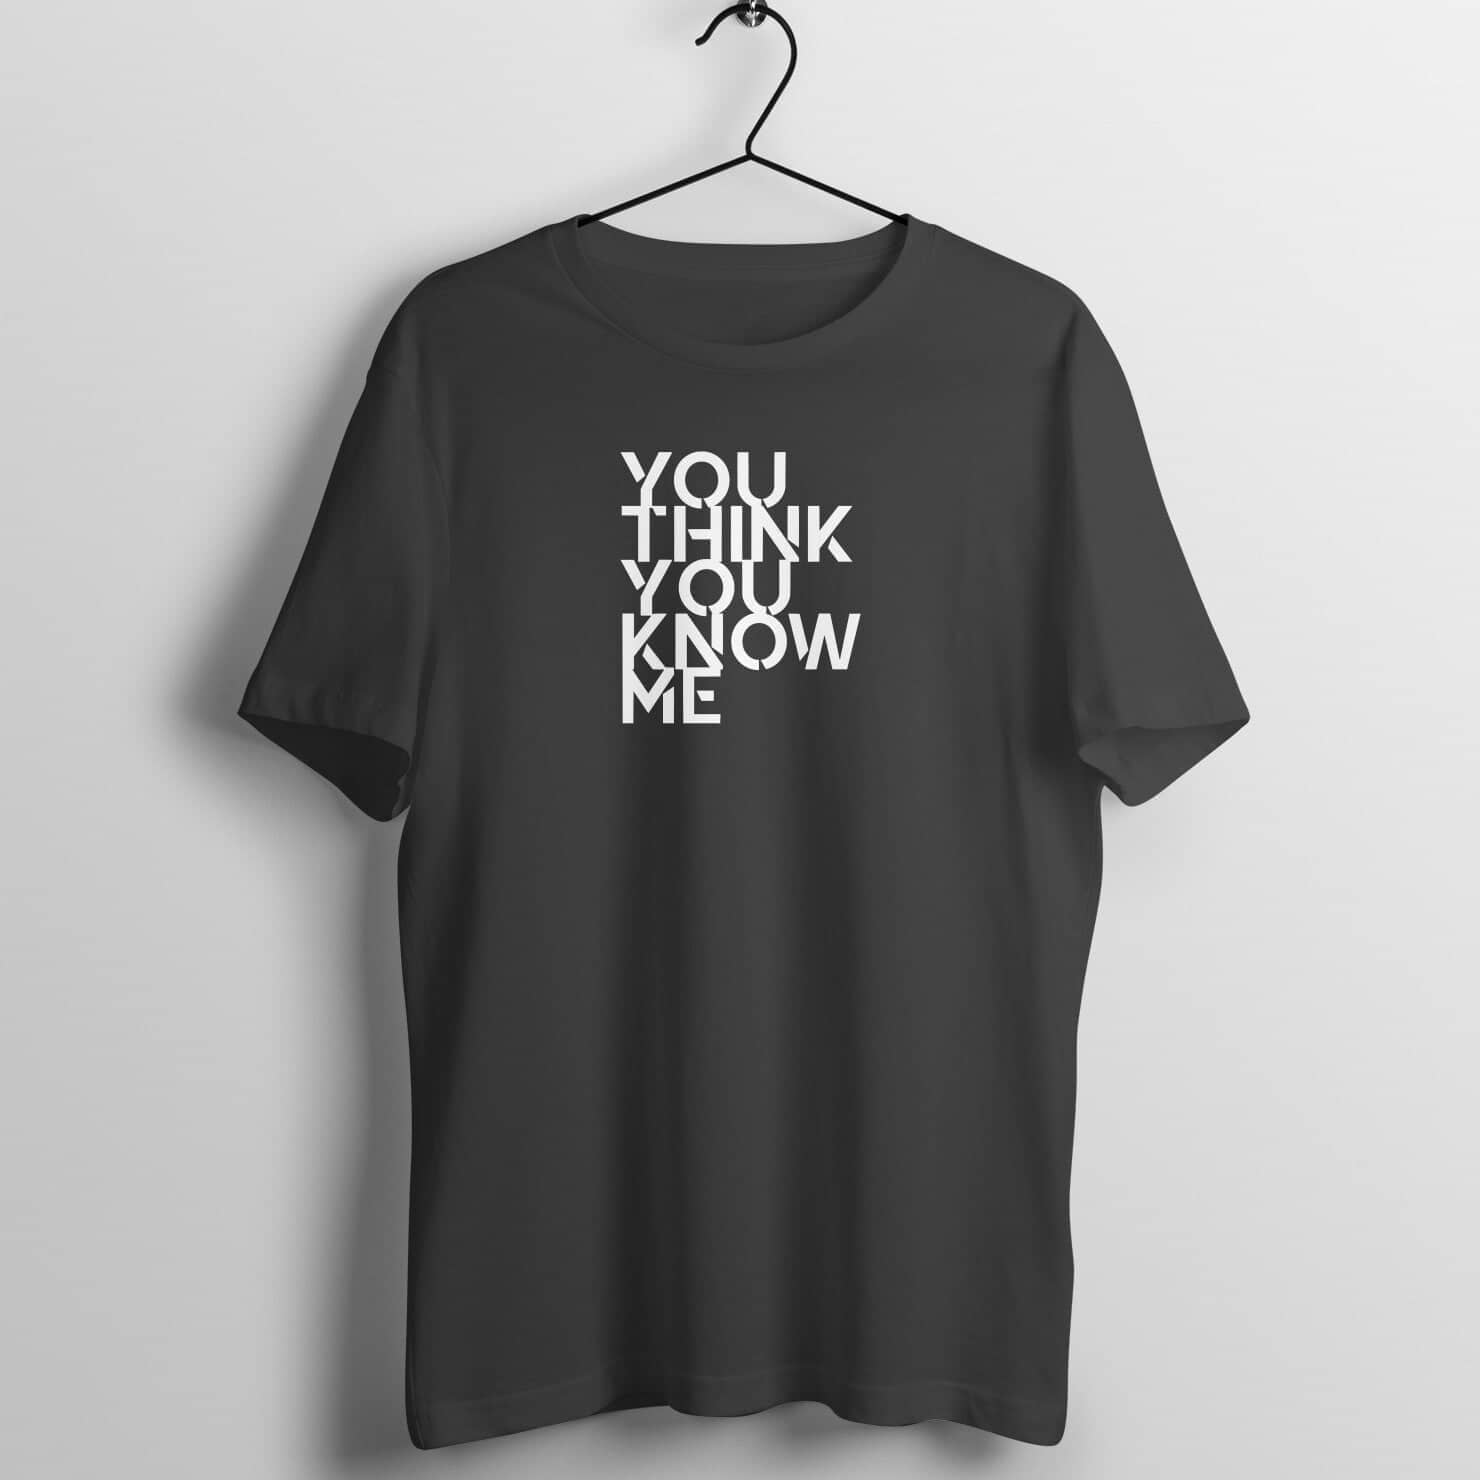 You Think You Know Me Exclusive Black T Shirt for Men and Women freeshipping - Catch My Drift India